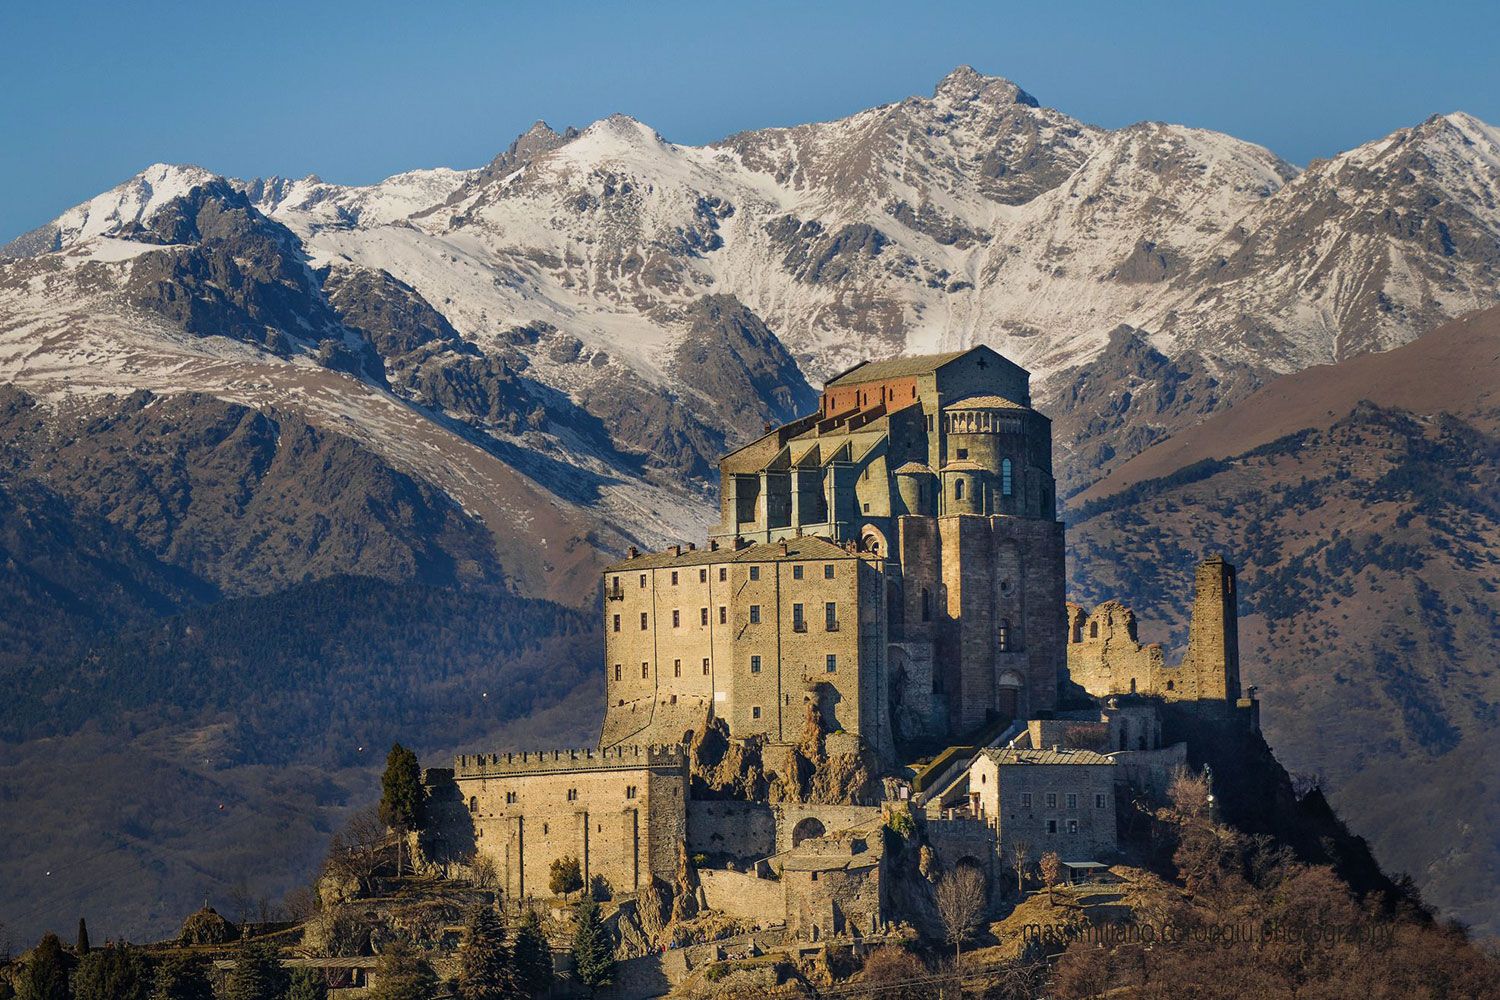 Saint Michael's Abbey in Piedmont has been defying the ravages of nature and man for more than 900 years. 